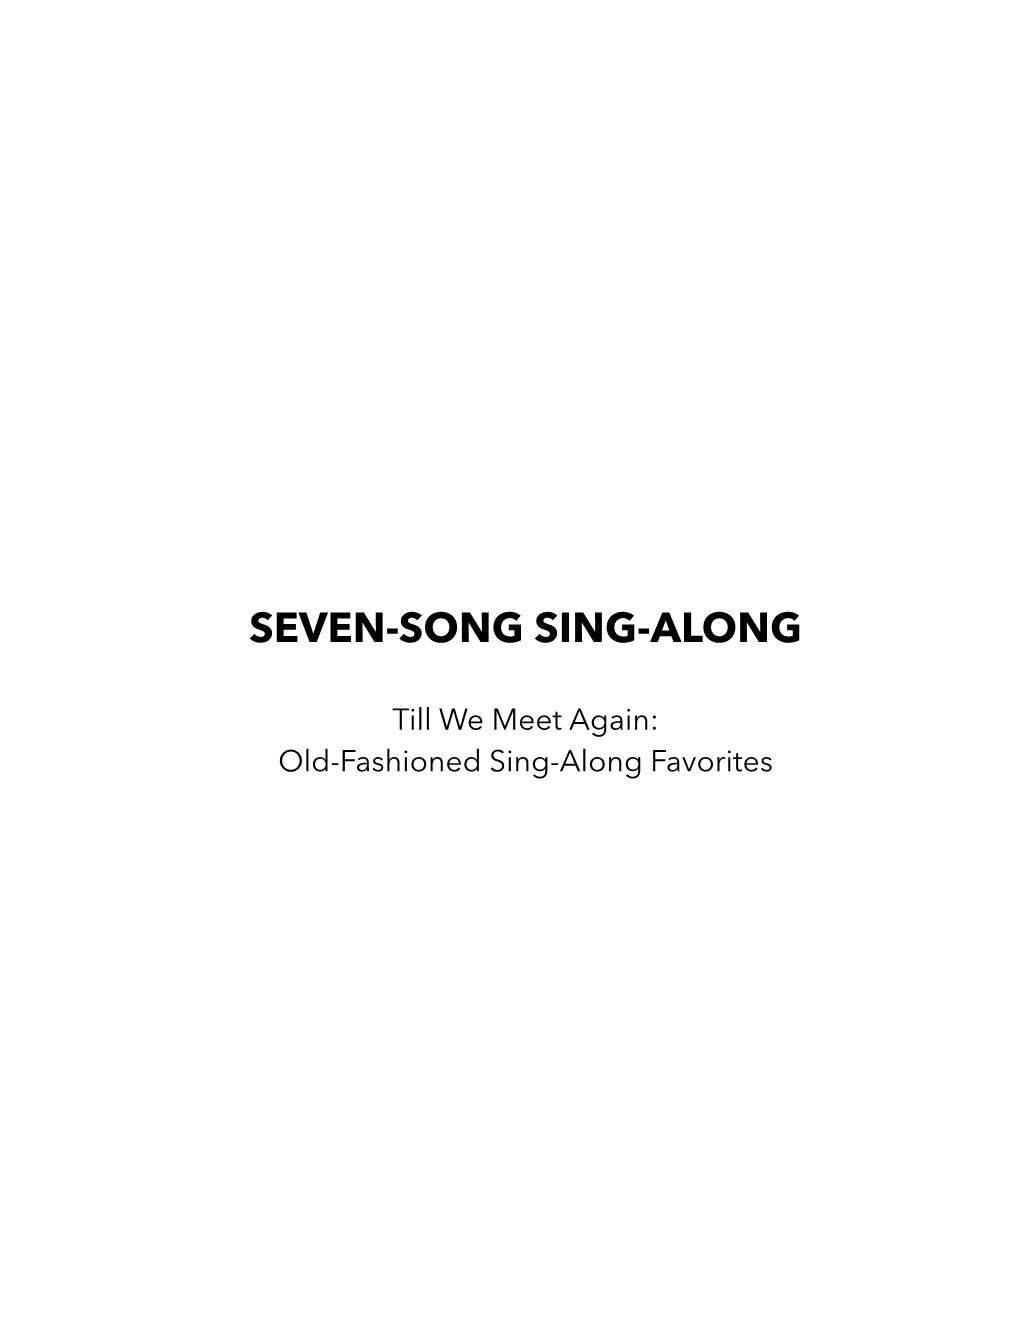 Sing-Along Words for Old-Fashioned Songs